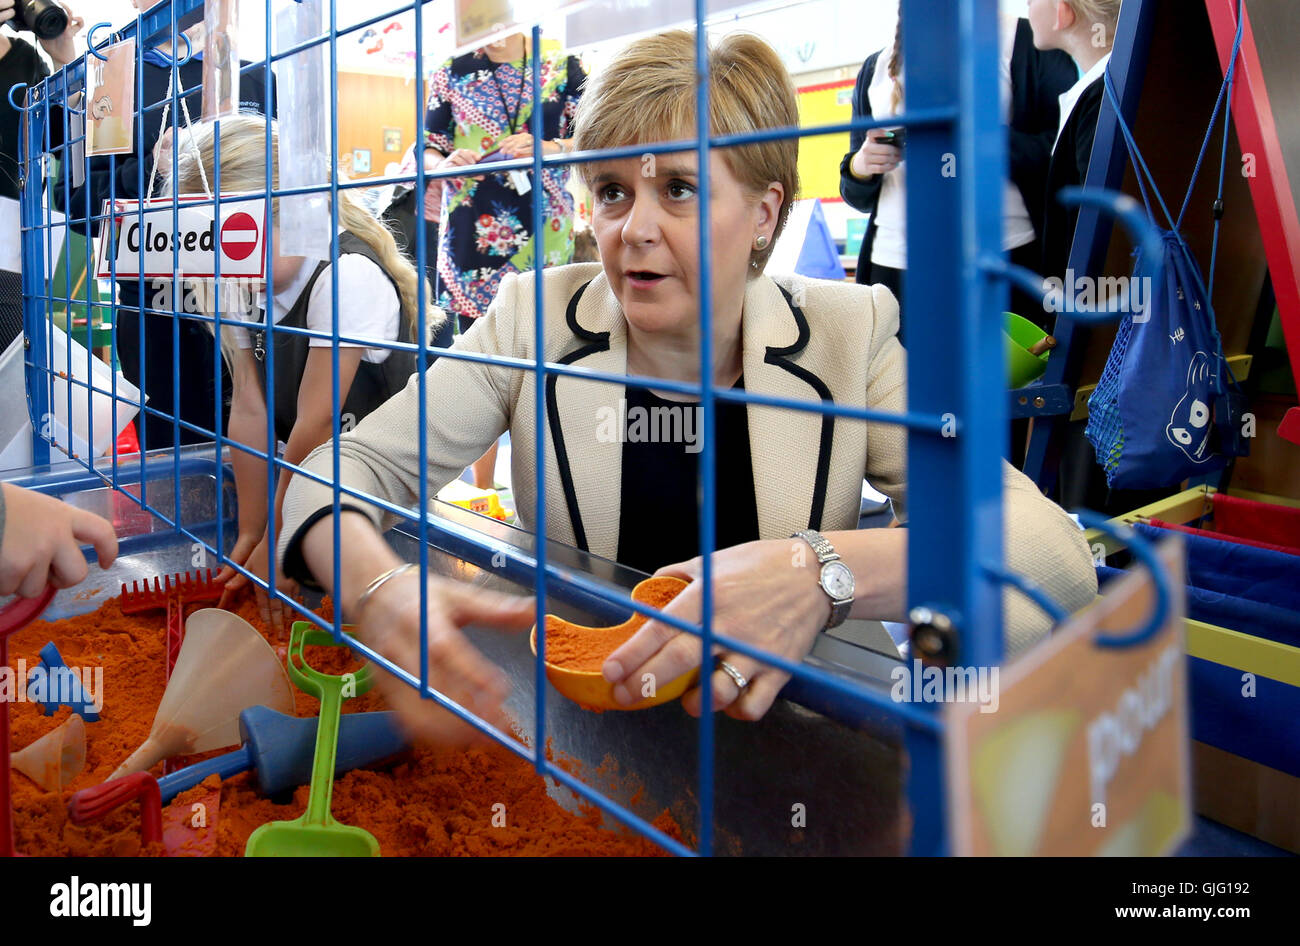 First Minister Nicola Sturgeon plays in the sand pit with P1 pupils during a visit to Burnfoot Community School, Hawick, to announce funding to raise educational attainment in deprived areas. Stock Photo